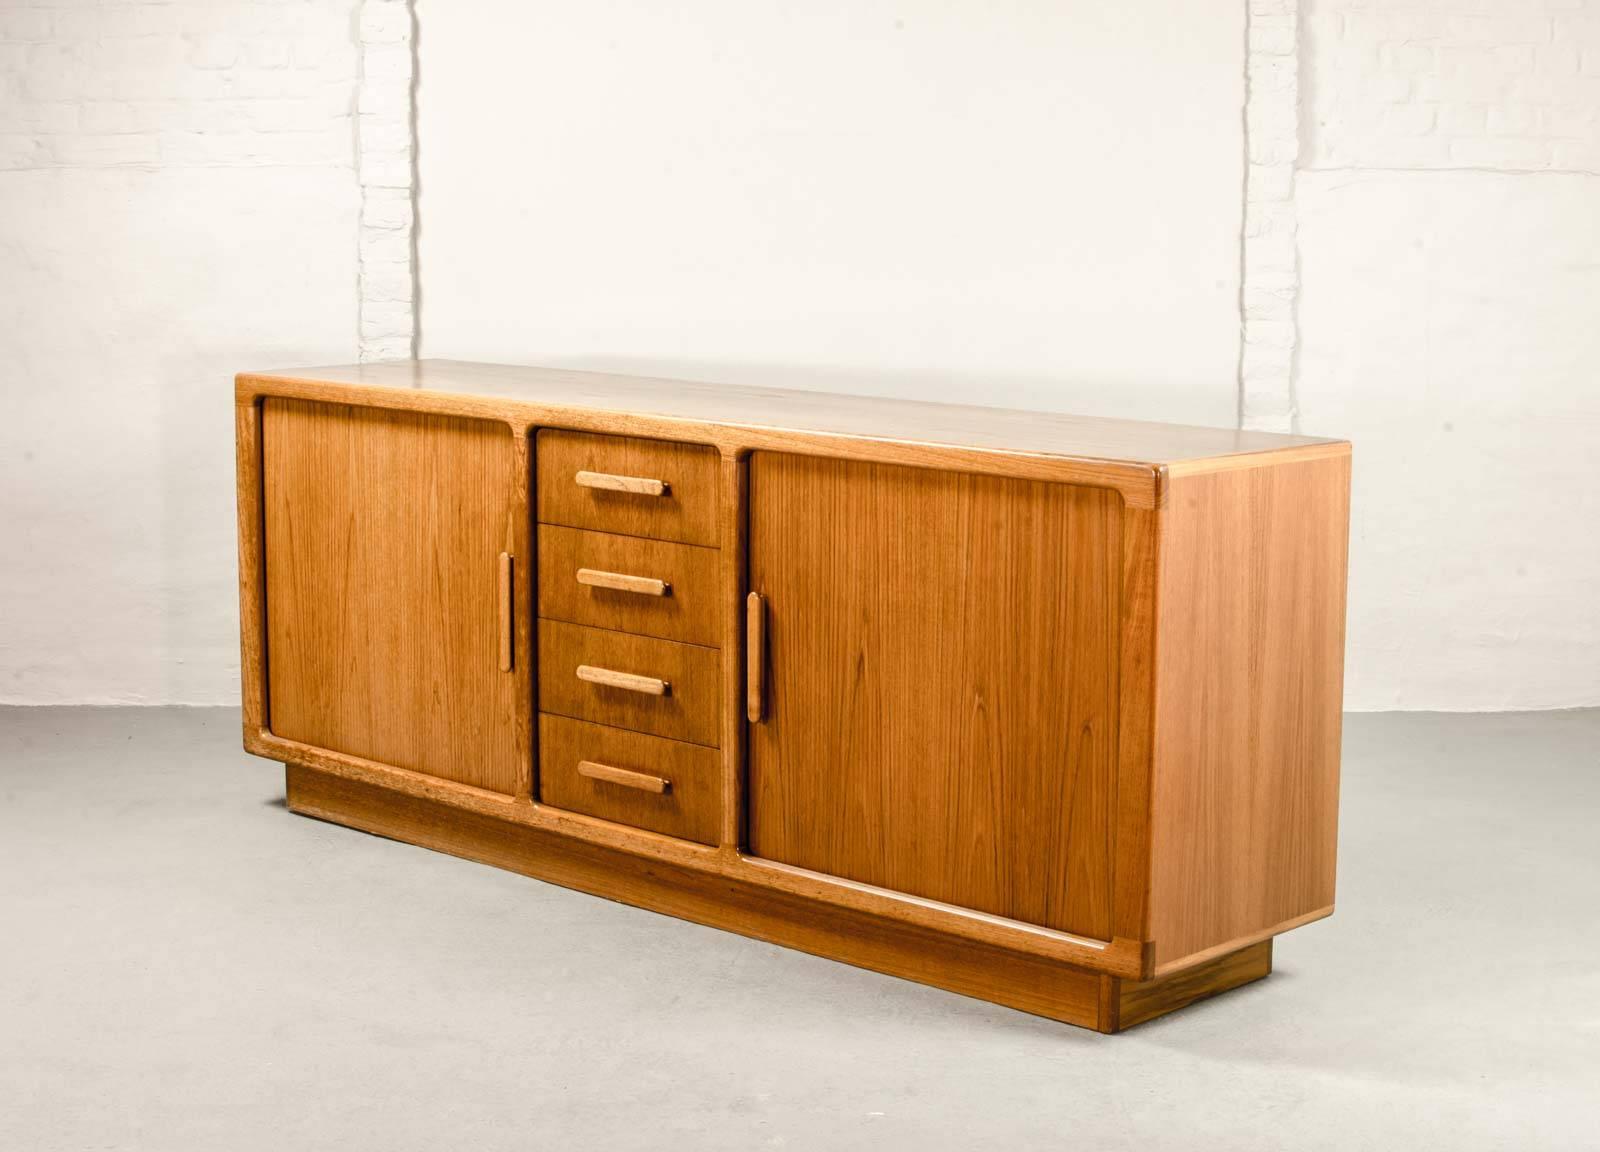 Beautiful credenza designed by Johannes Andersen and constructed in Denmark by CPC Silkeborg in the 1960s.
This teak sideboard features elegant tambour doors and contains four drawers and two storage units. This sideboard/credenza is in absolute